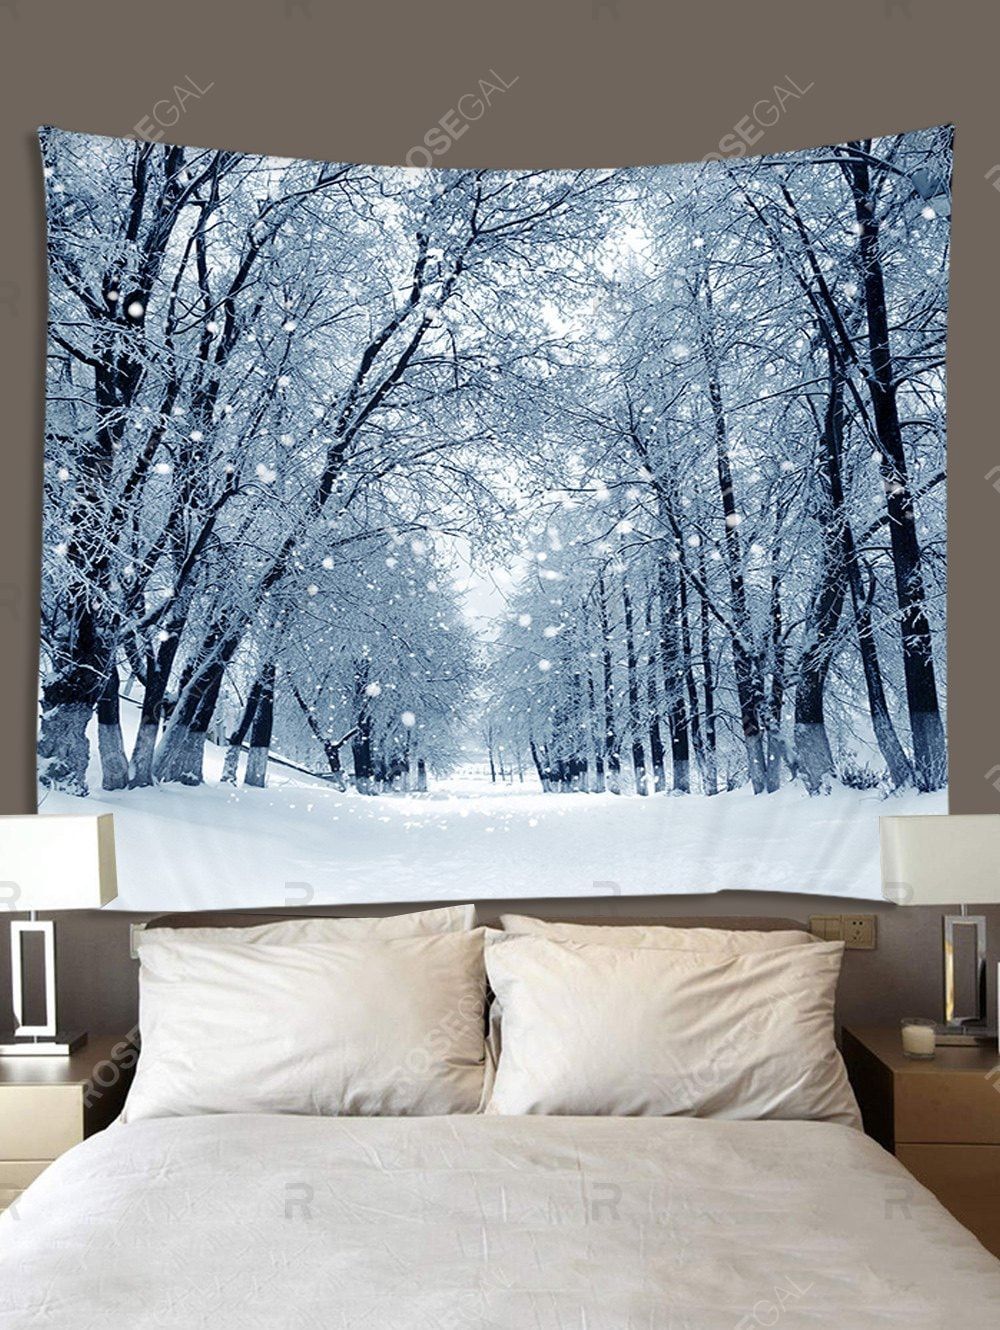 Snow Forest Road Print Tapestry Wall Hanging Art Decor Within Snow Wall Art (View 3 of 15)